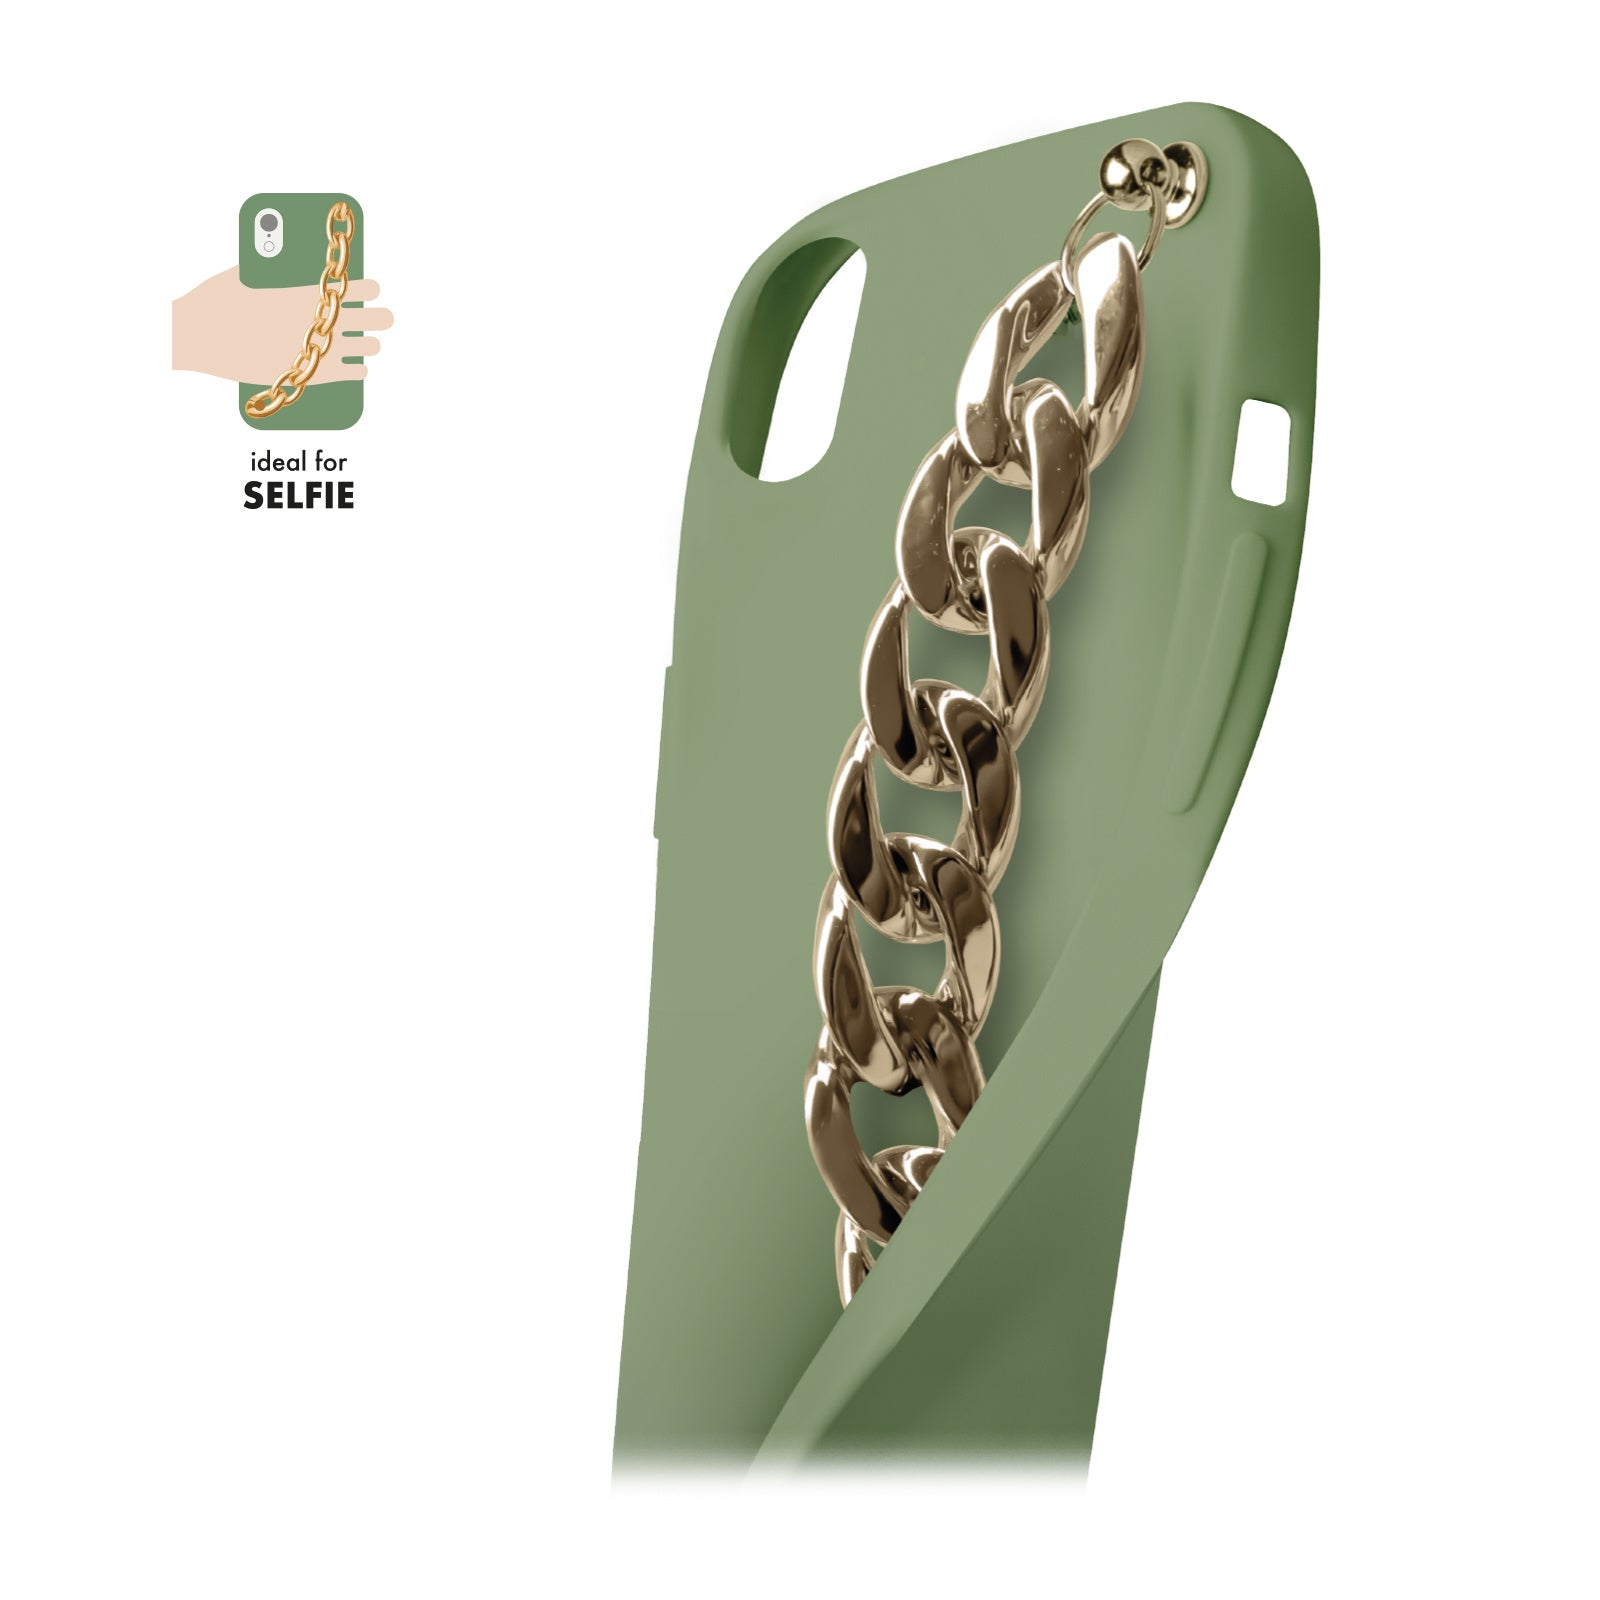 SBS case&me Metal Chain cover fr iPhone XR green